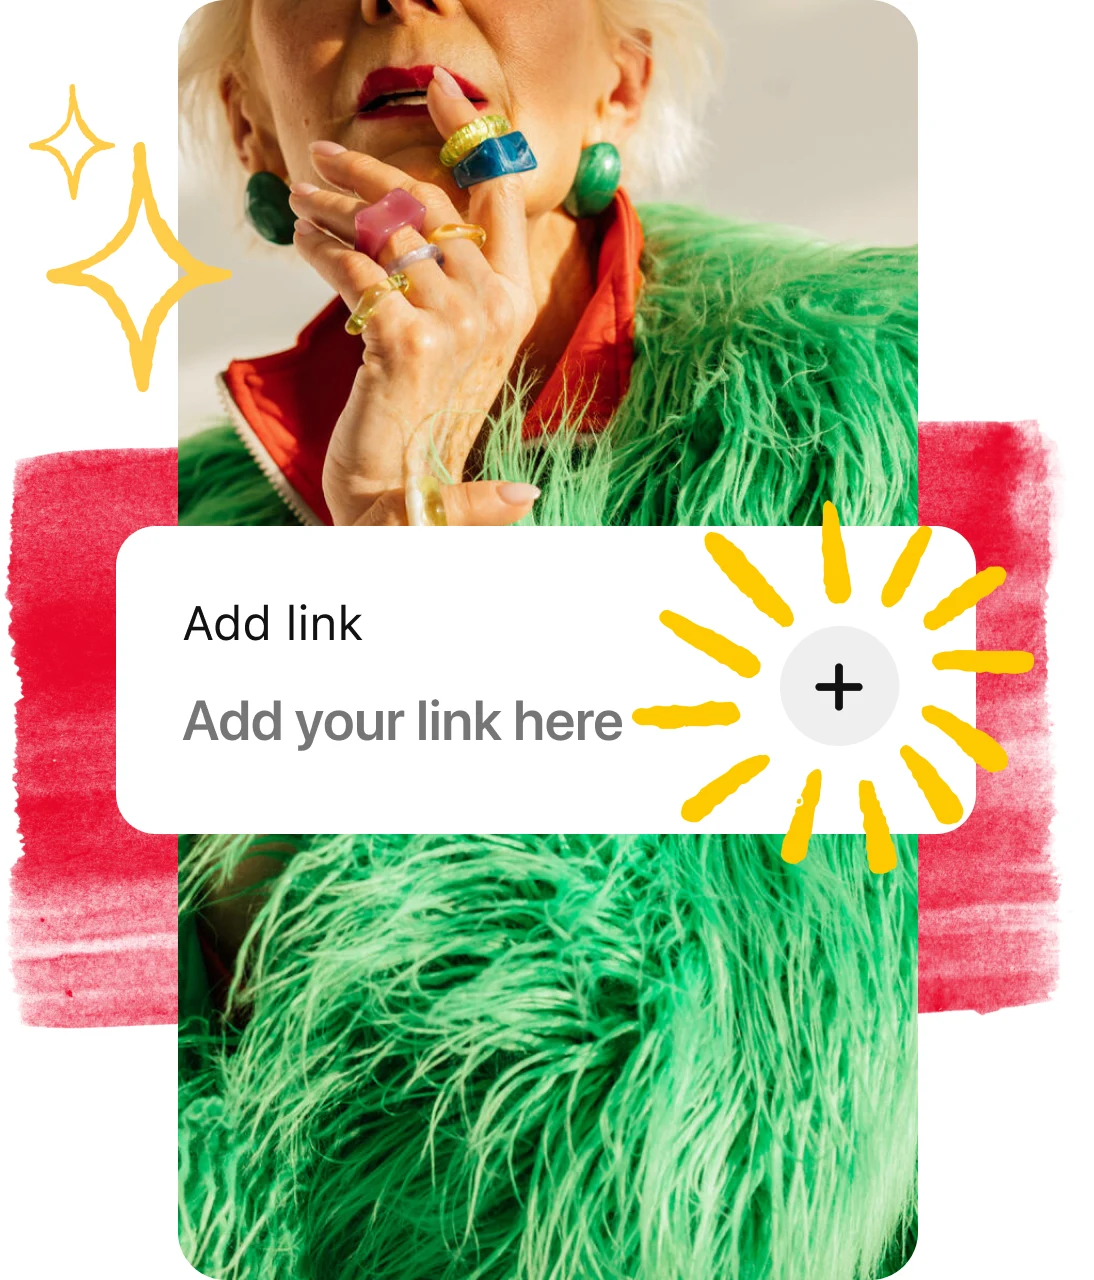 Add your link button overlaid on pin of woman in green fur coat